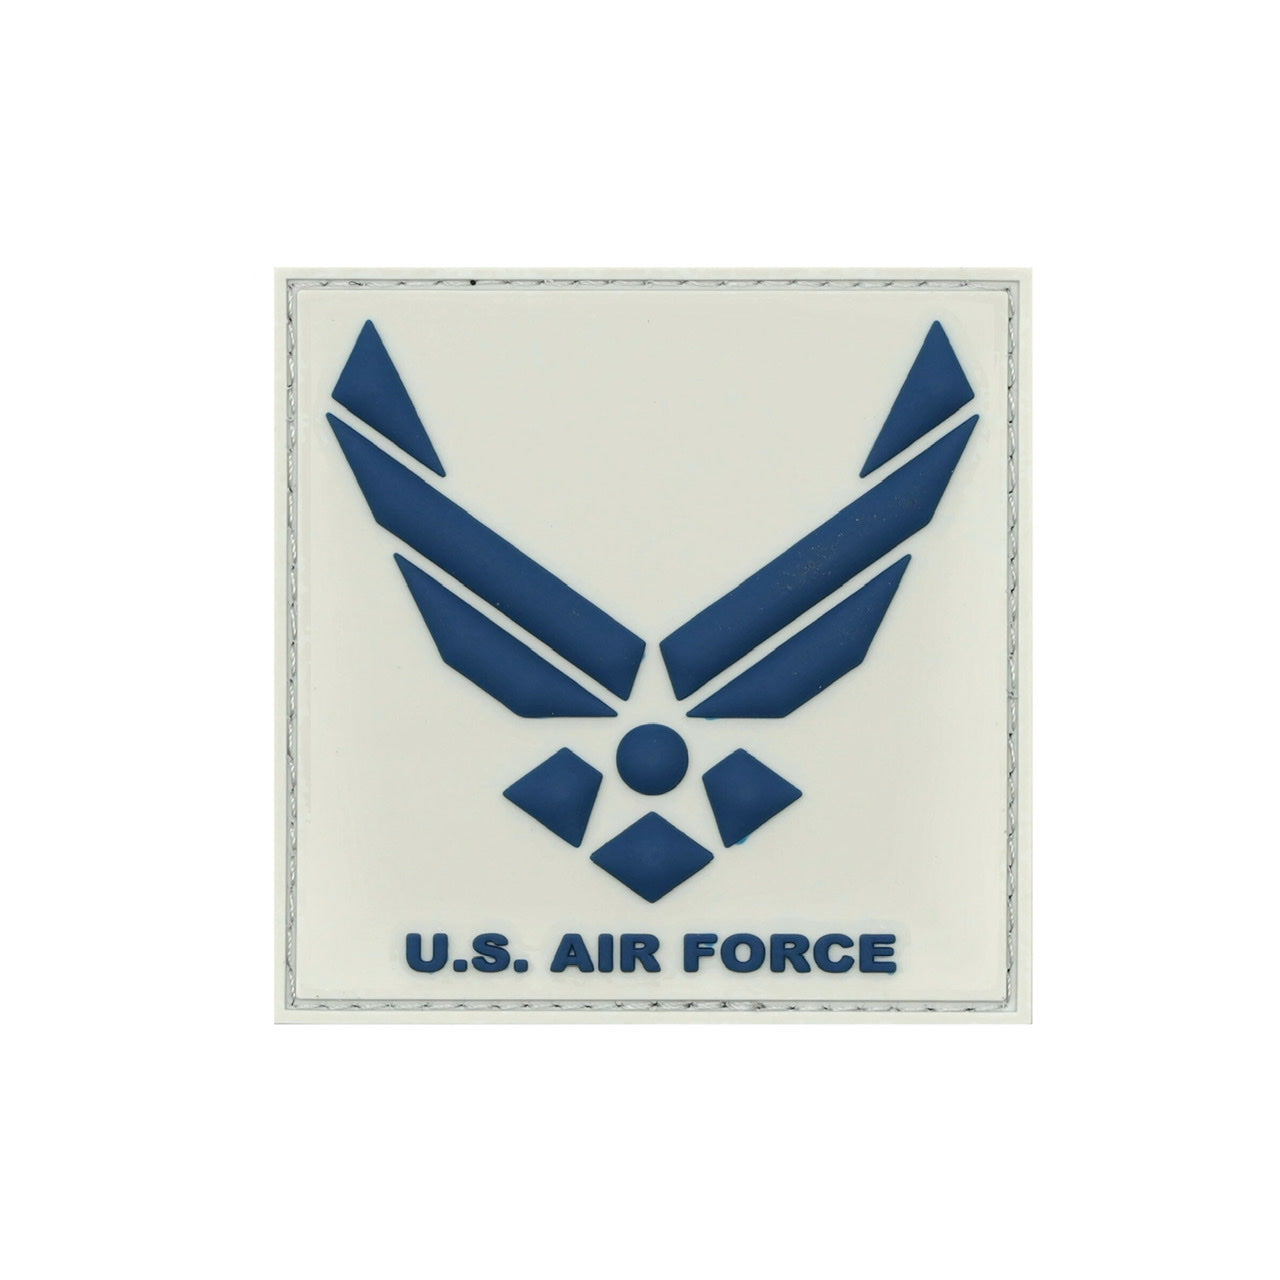 U.S. Air Force Velcro Patch